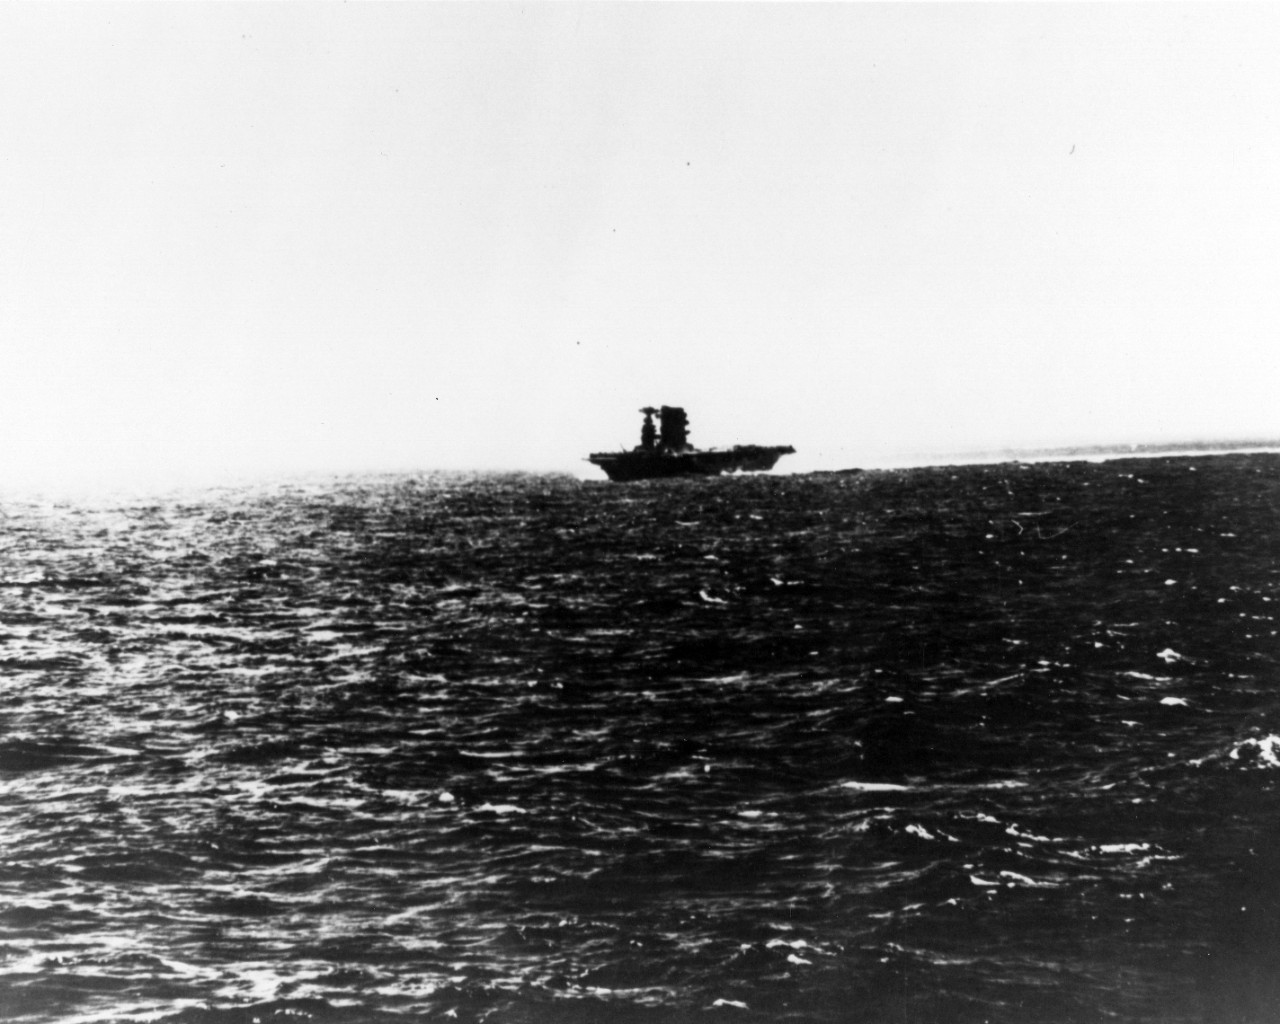 Photo #: 80-G-16565  Battle of the Coral Sea, May 1942